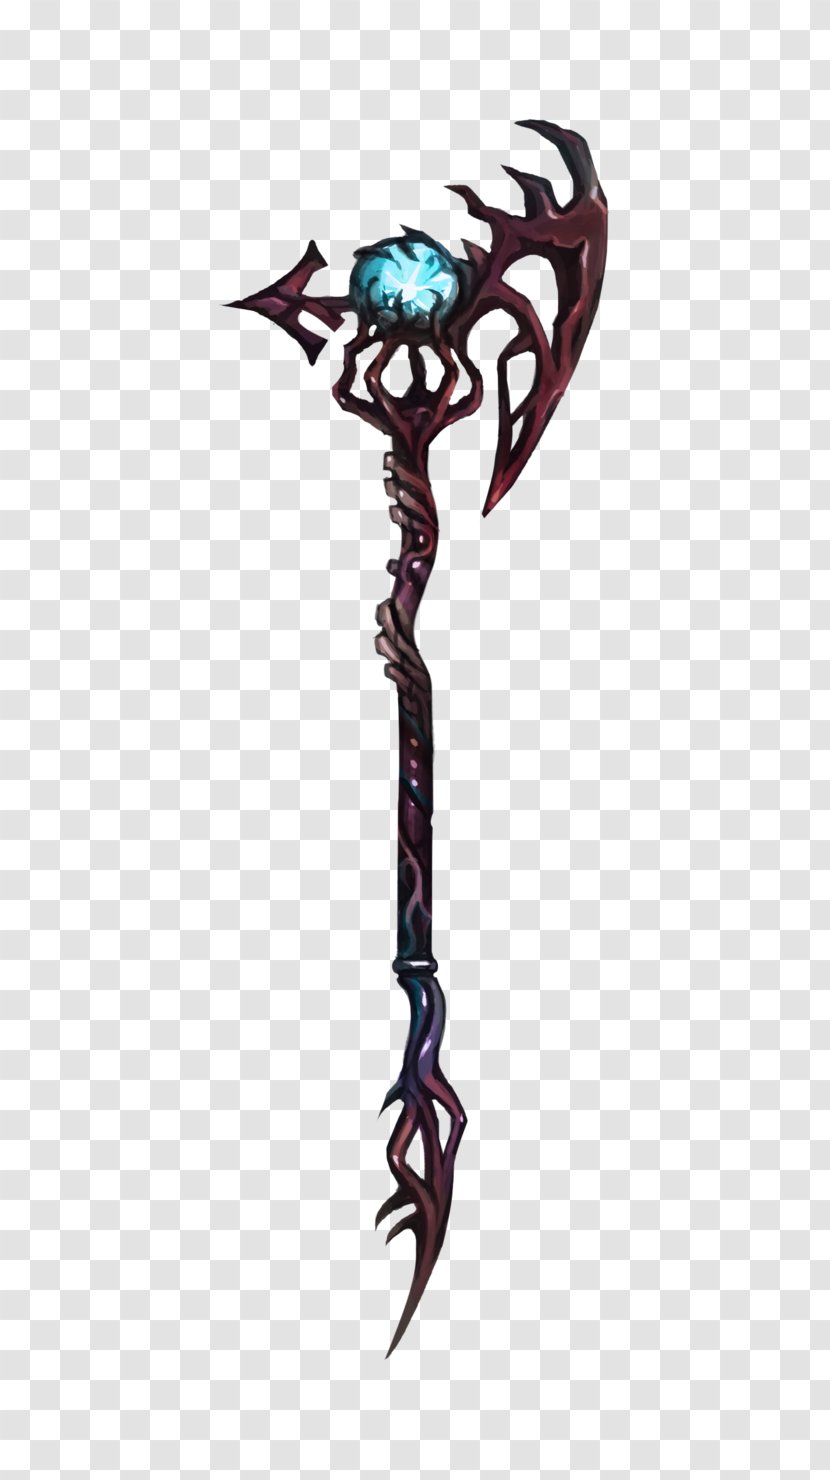 Character Fiction Weapon - Magic Staff Transparent PNG